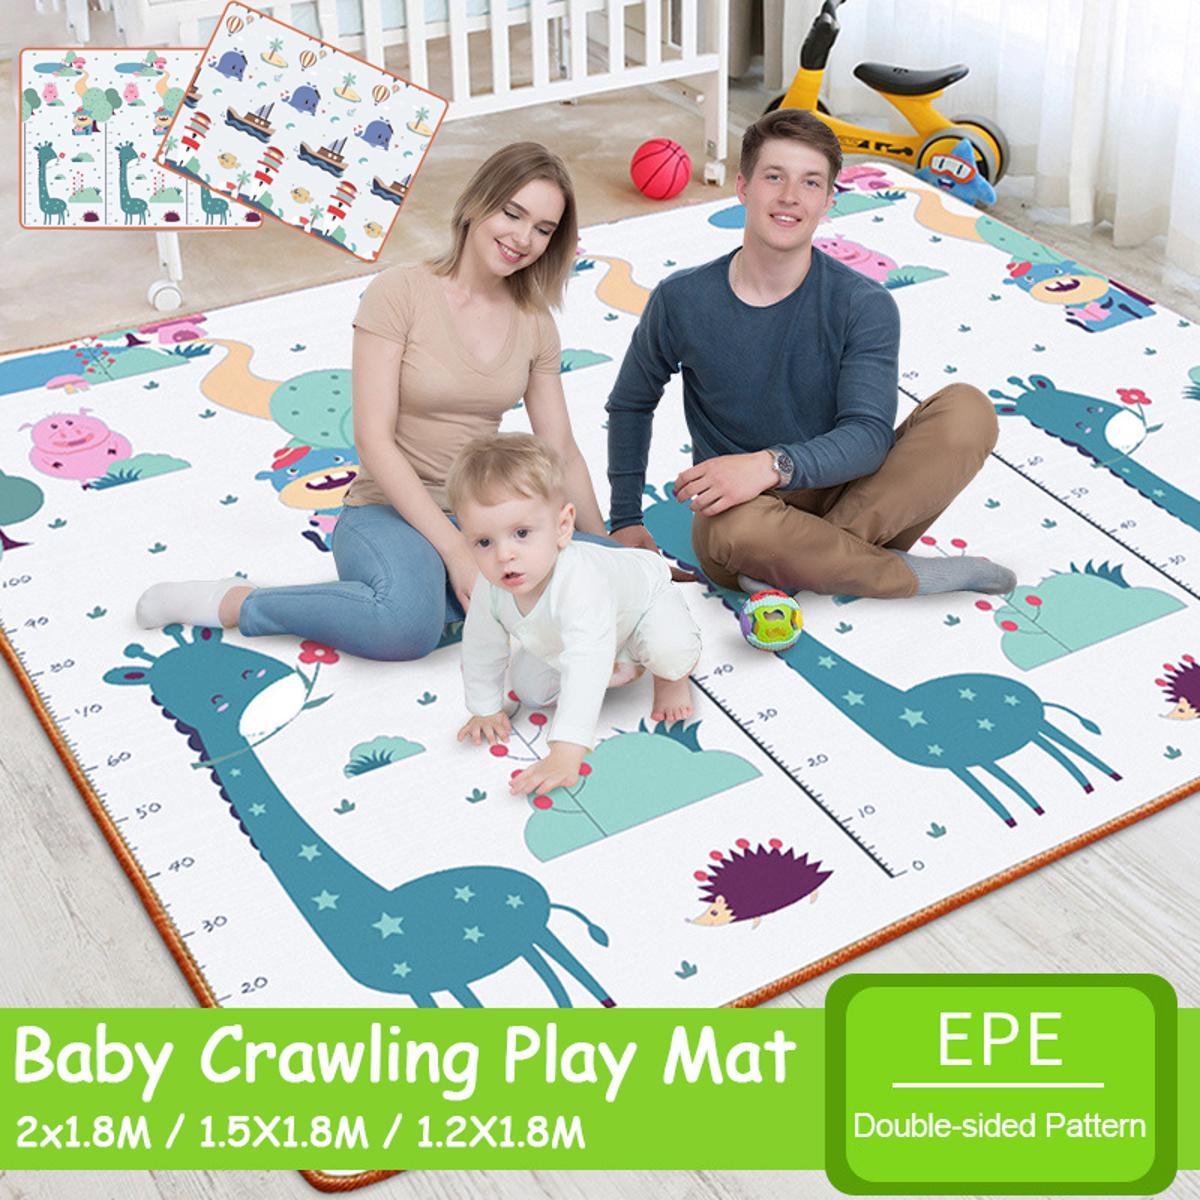 Nyt Portable Baby Climbing Play Mat Epe Baby Room Crawling Pad Double-Sided Cartoon - 1.8X1.2X0.5